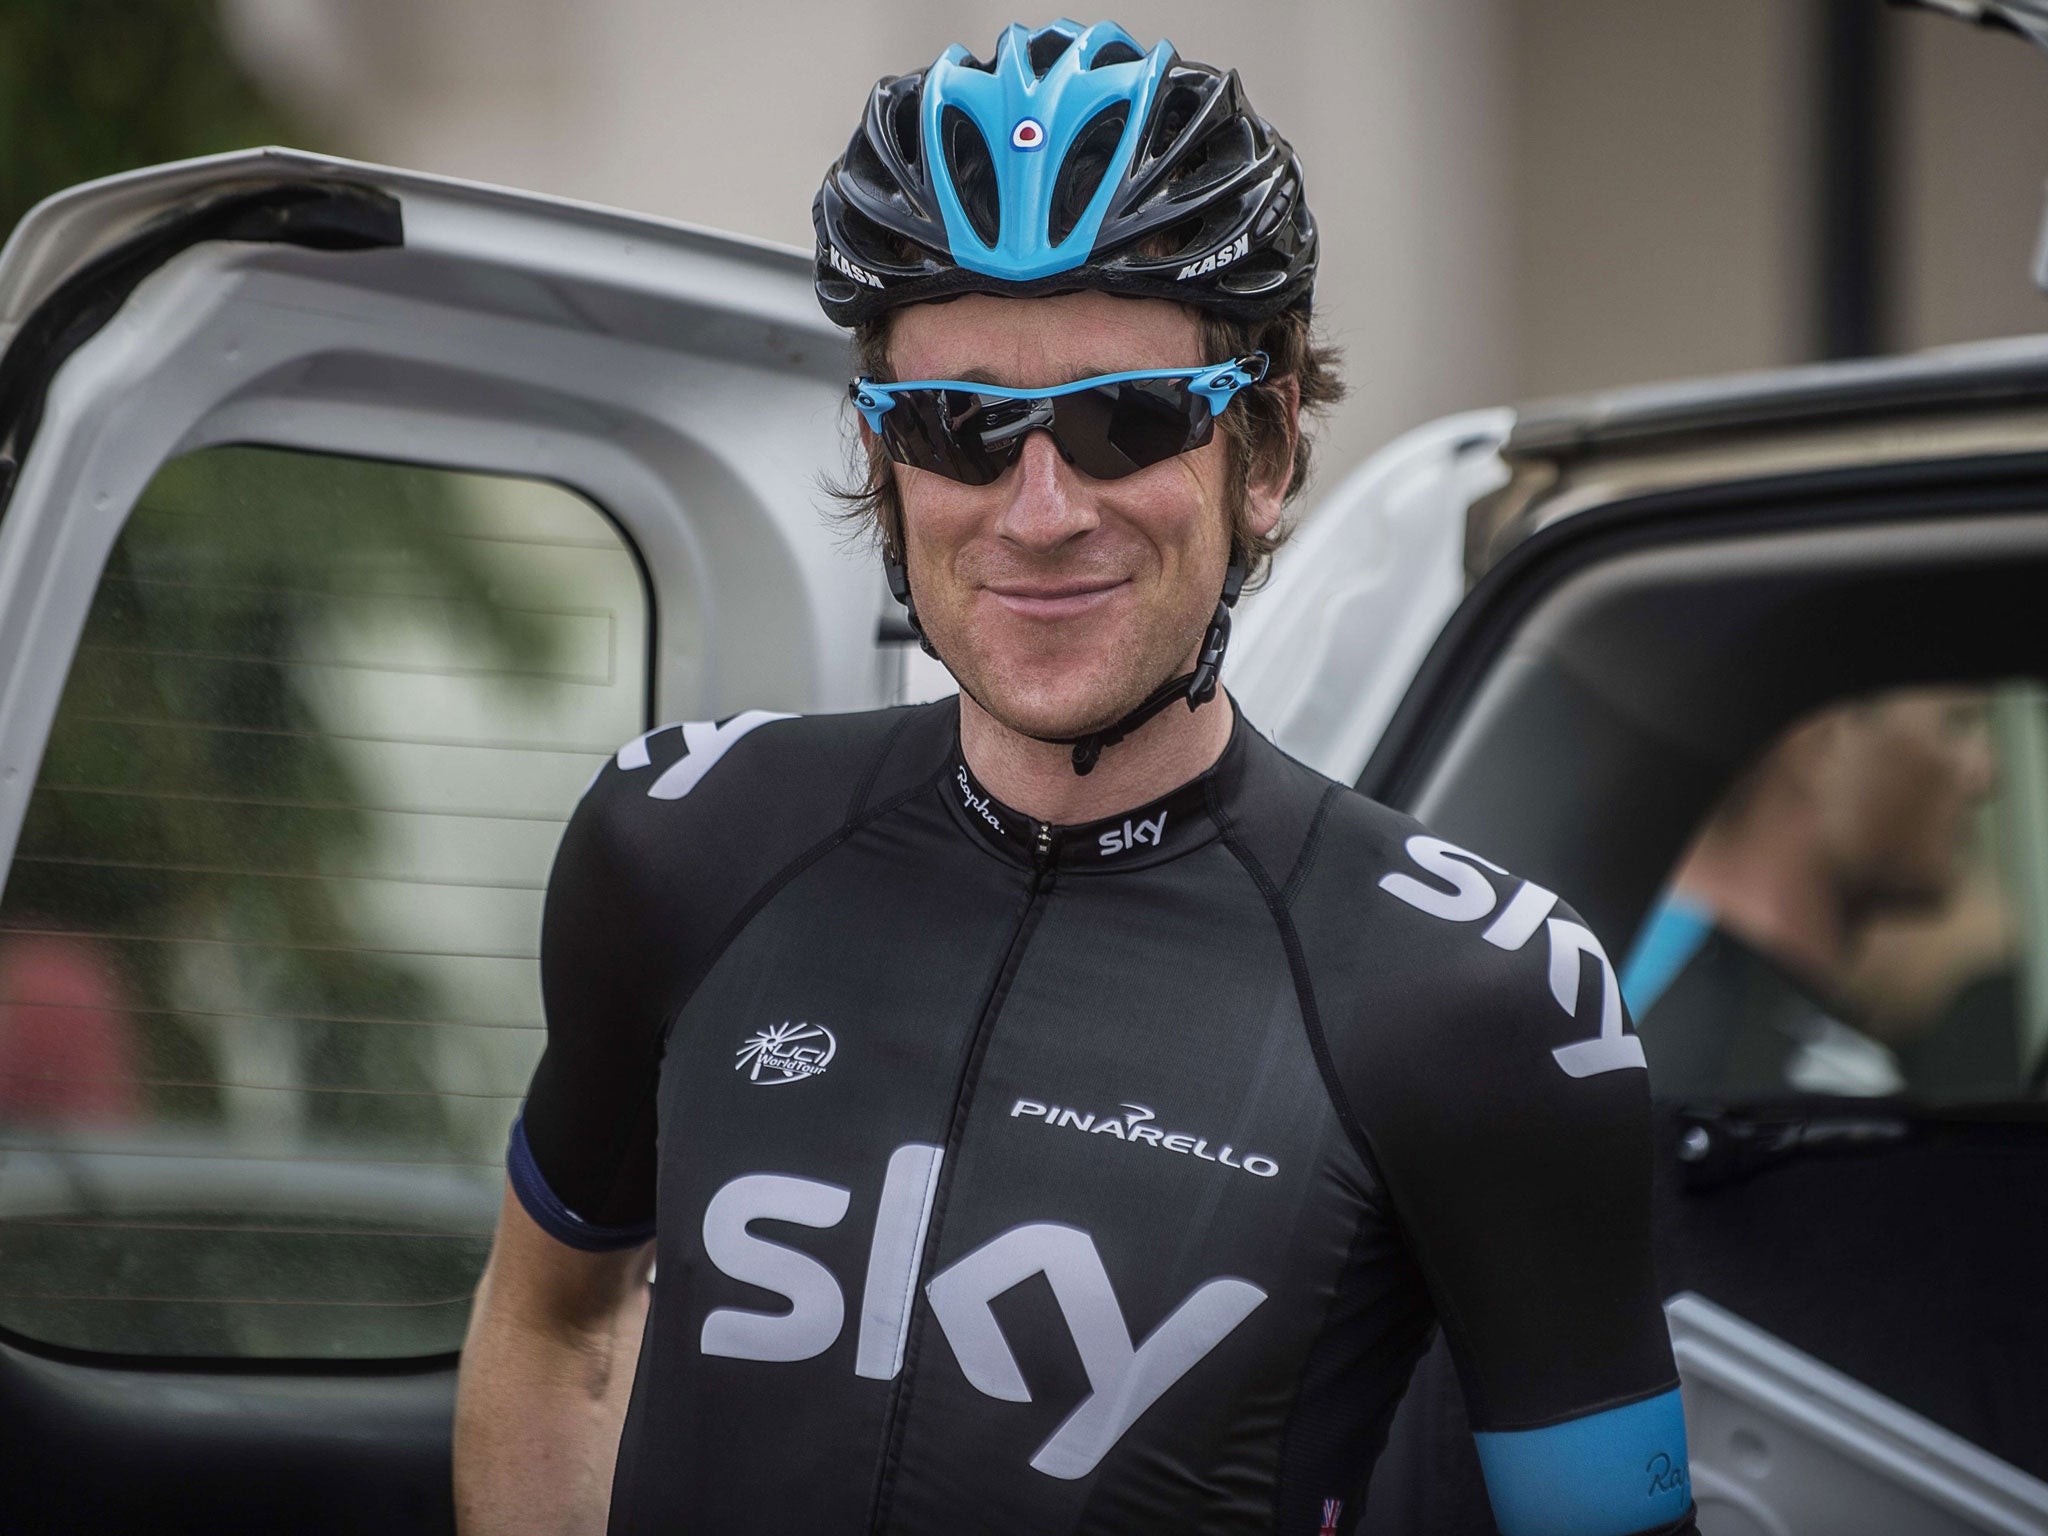 Sir Bradley Wiggins will lead a strong Team Sky squad in the Tour of Britain